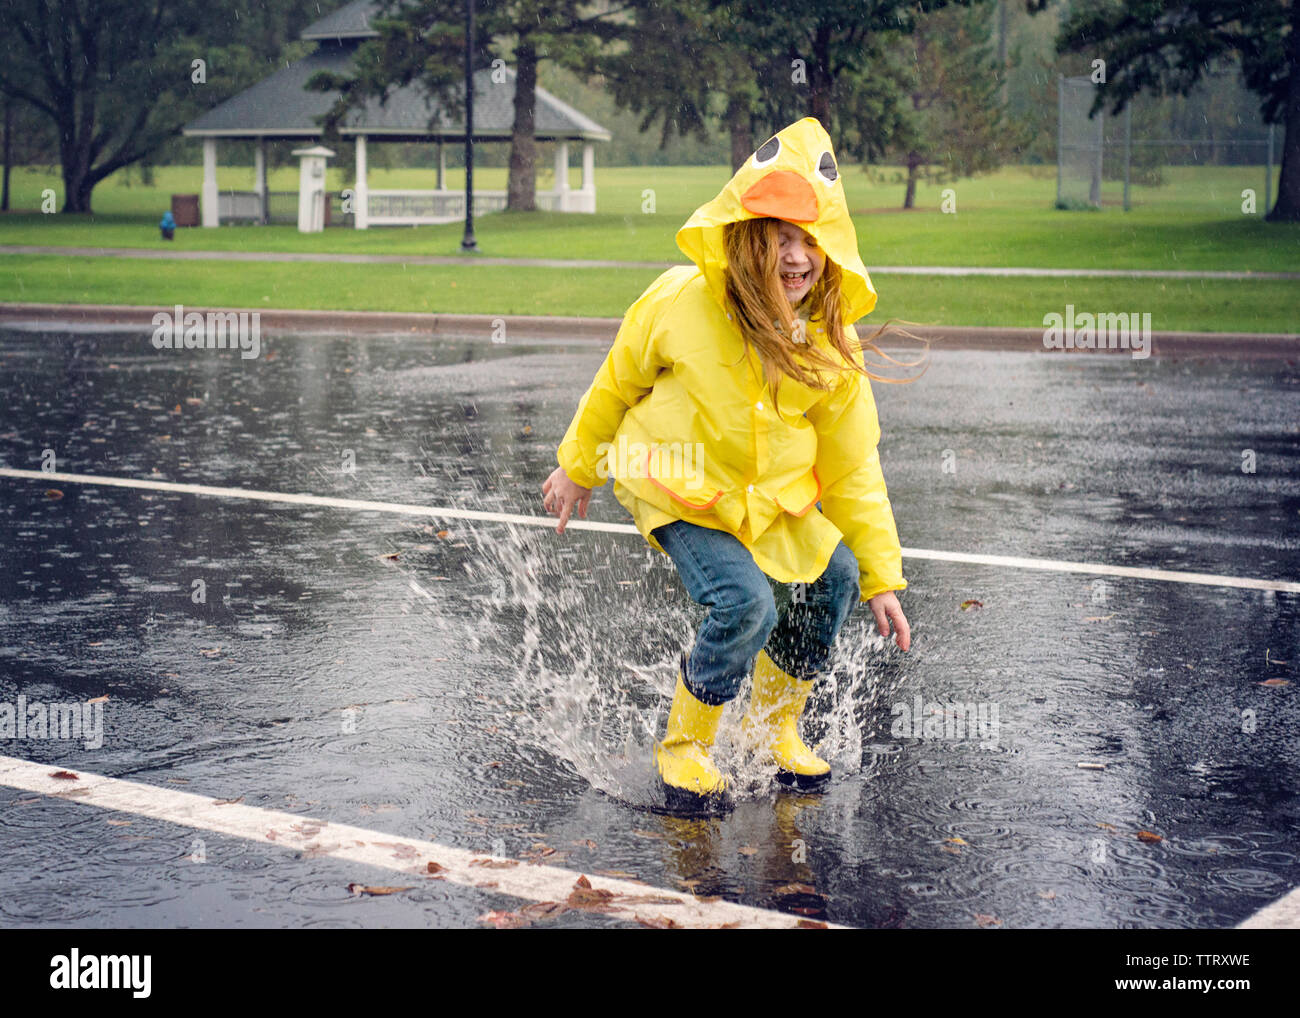 Playful girl wearing raincoat while jumping in puddle during rainfall Stock Photo